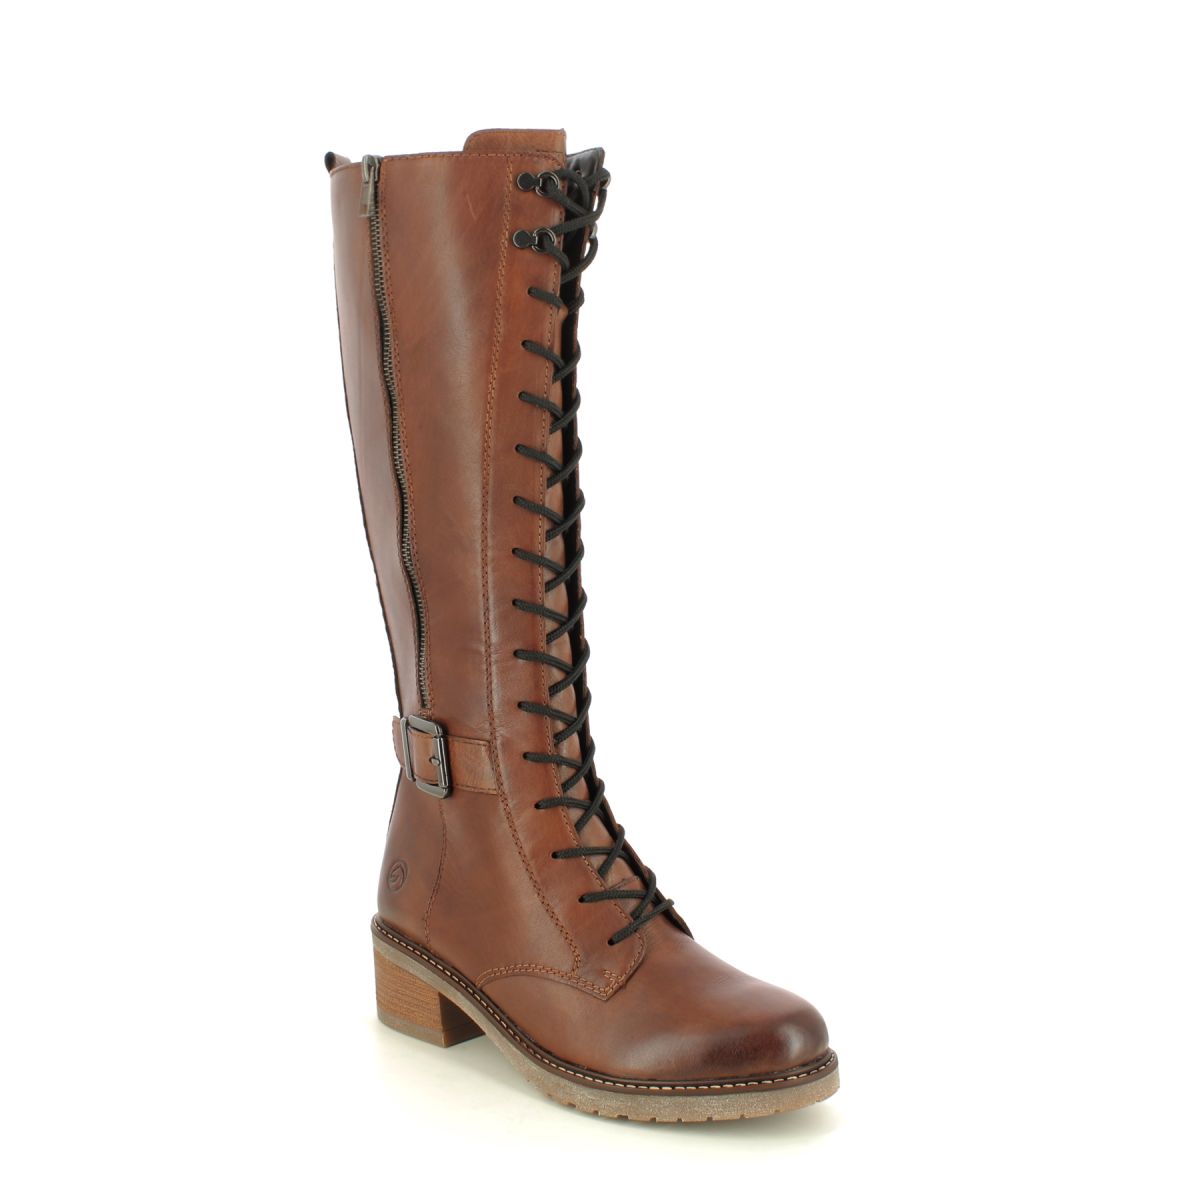 Remonte Menarem Lace Brown Leather Womens Knee-High Boots D1A74-22 In Size 41 In Plain Brown Leather